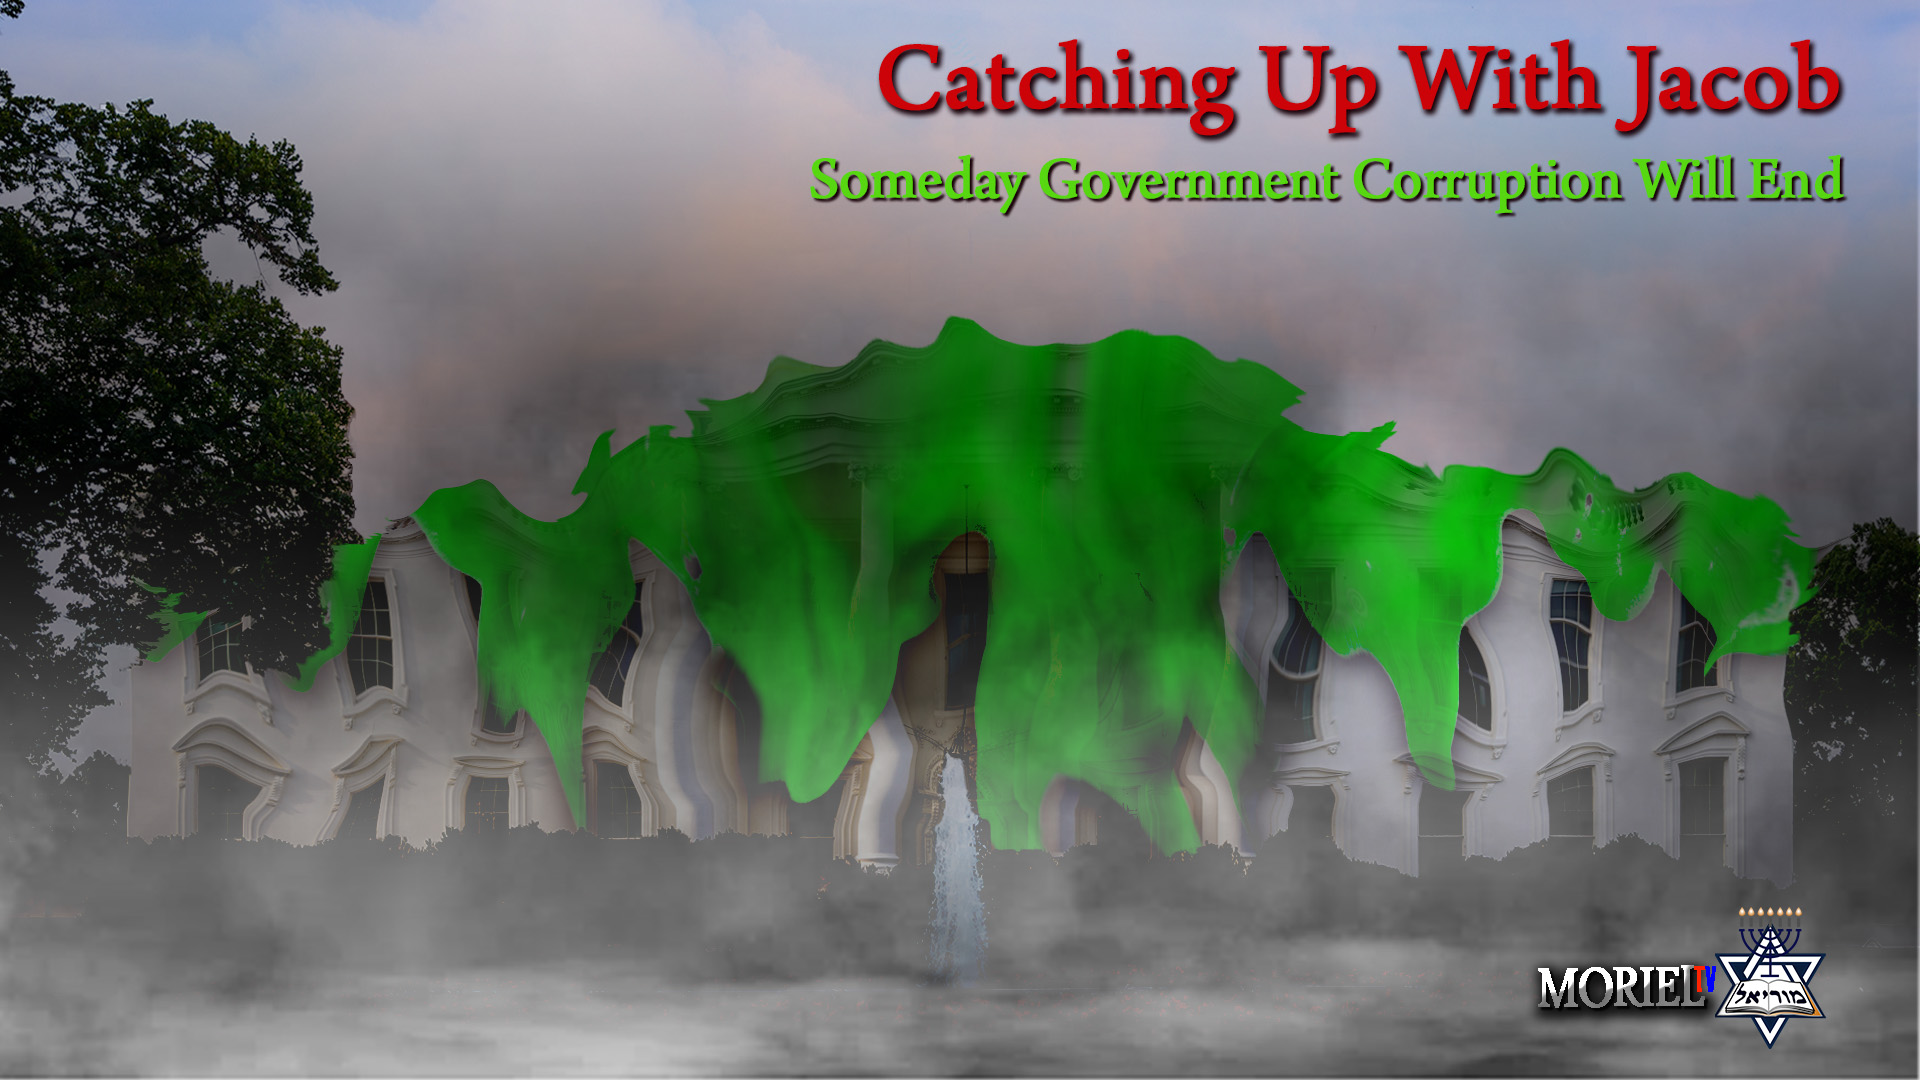 Someday Government Corruption Will End